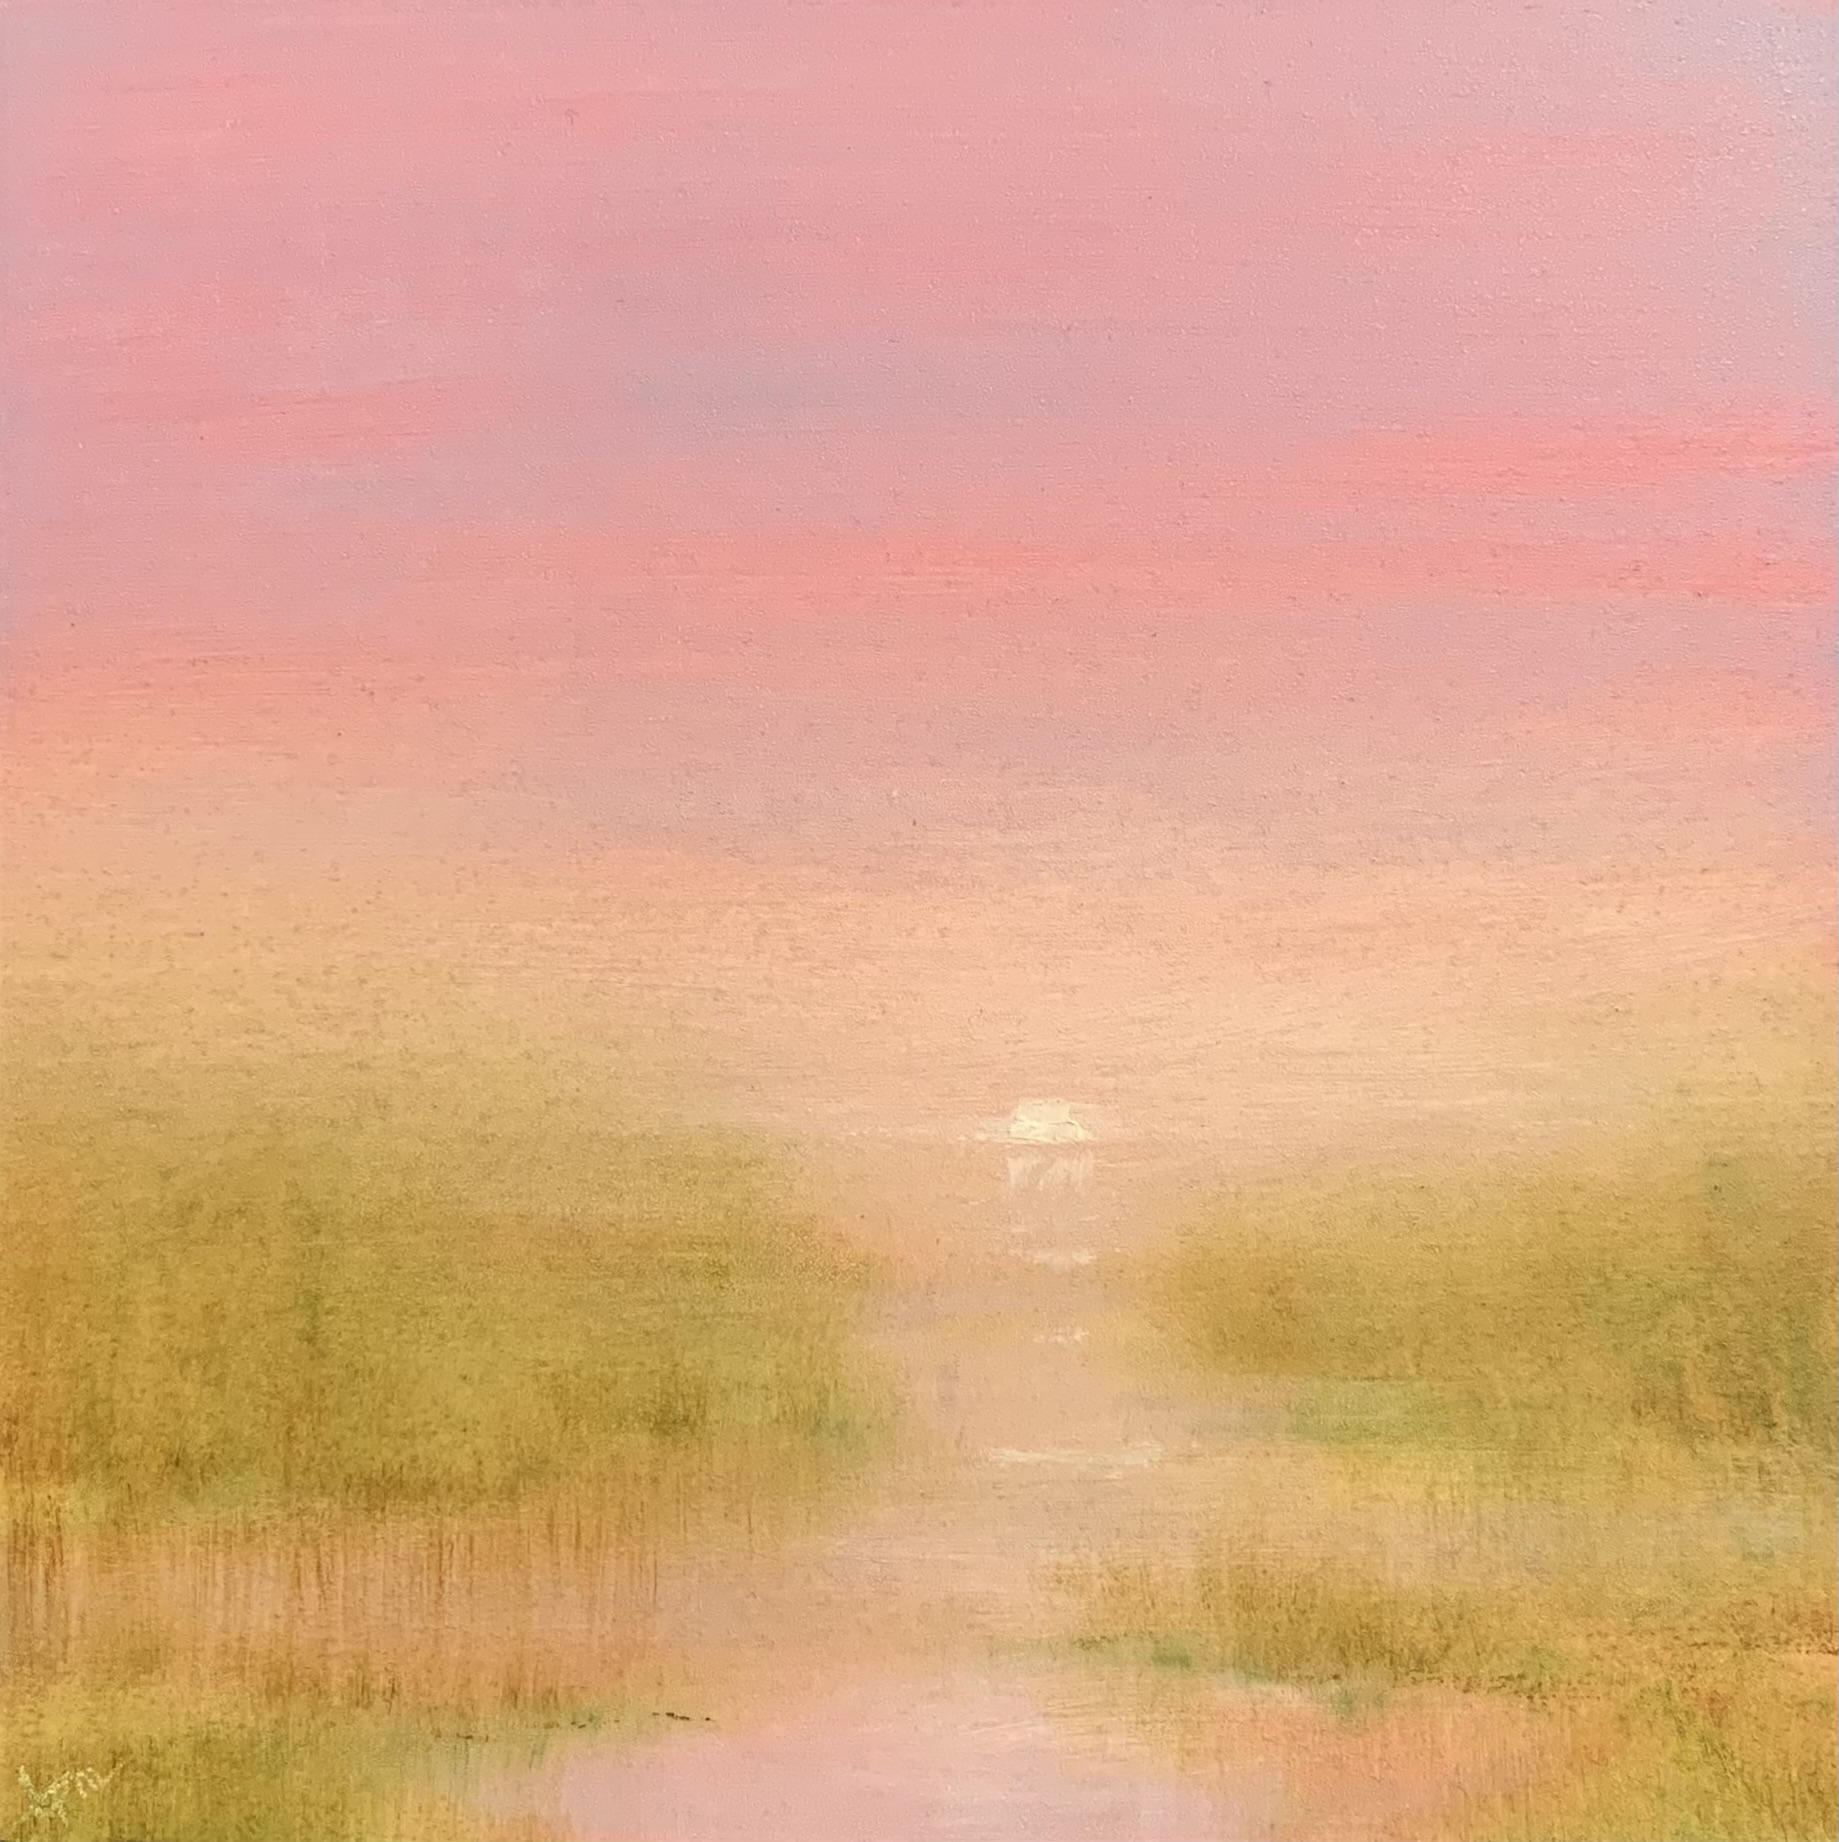 Original landscape oil painting by Tisha Mark, Week 35, 52 Weeks of Finding Light Series, 6"x6" oil on gessobord (2023). An atmospheric marshy landscape underneath a soft, pink and lavender sunrise sky.